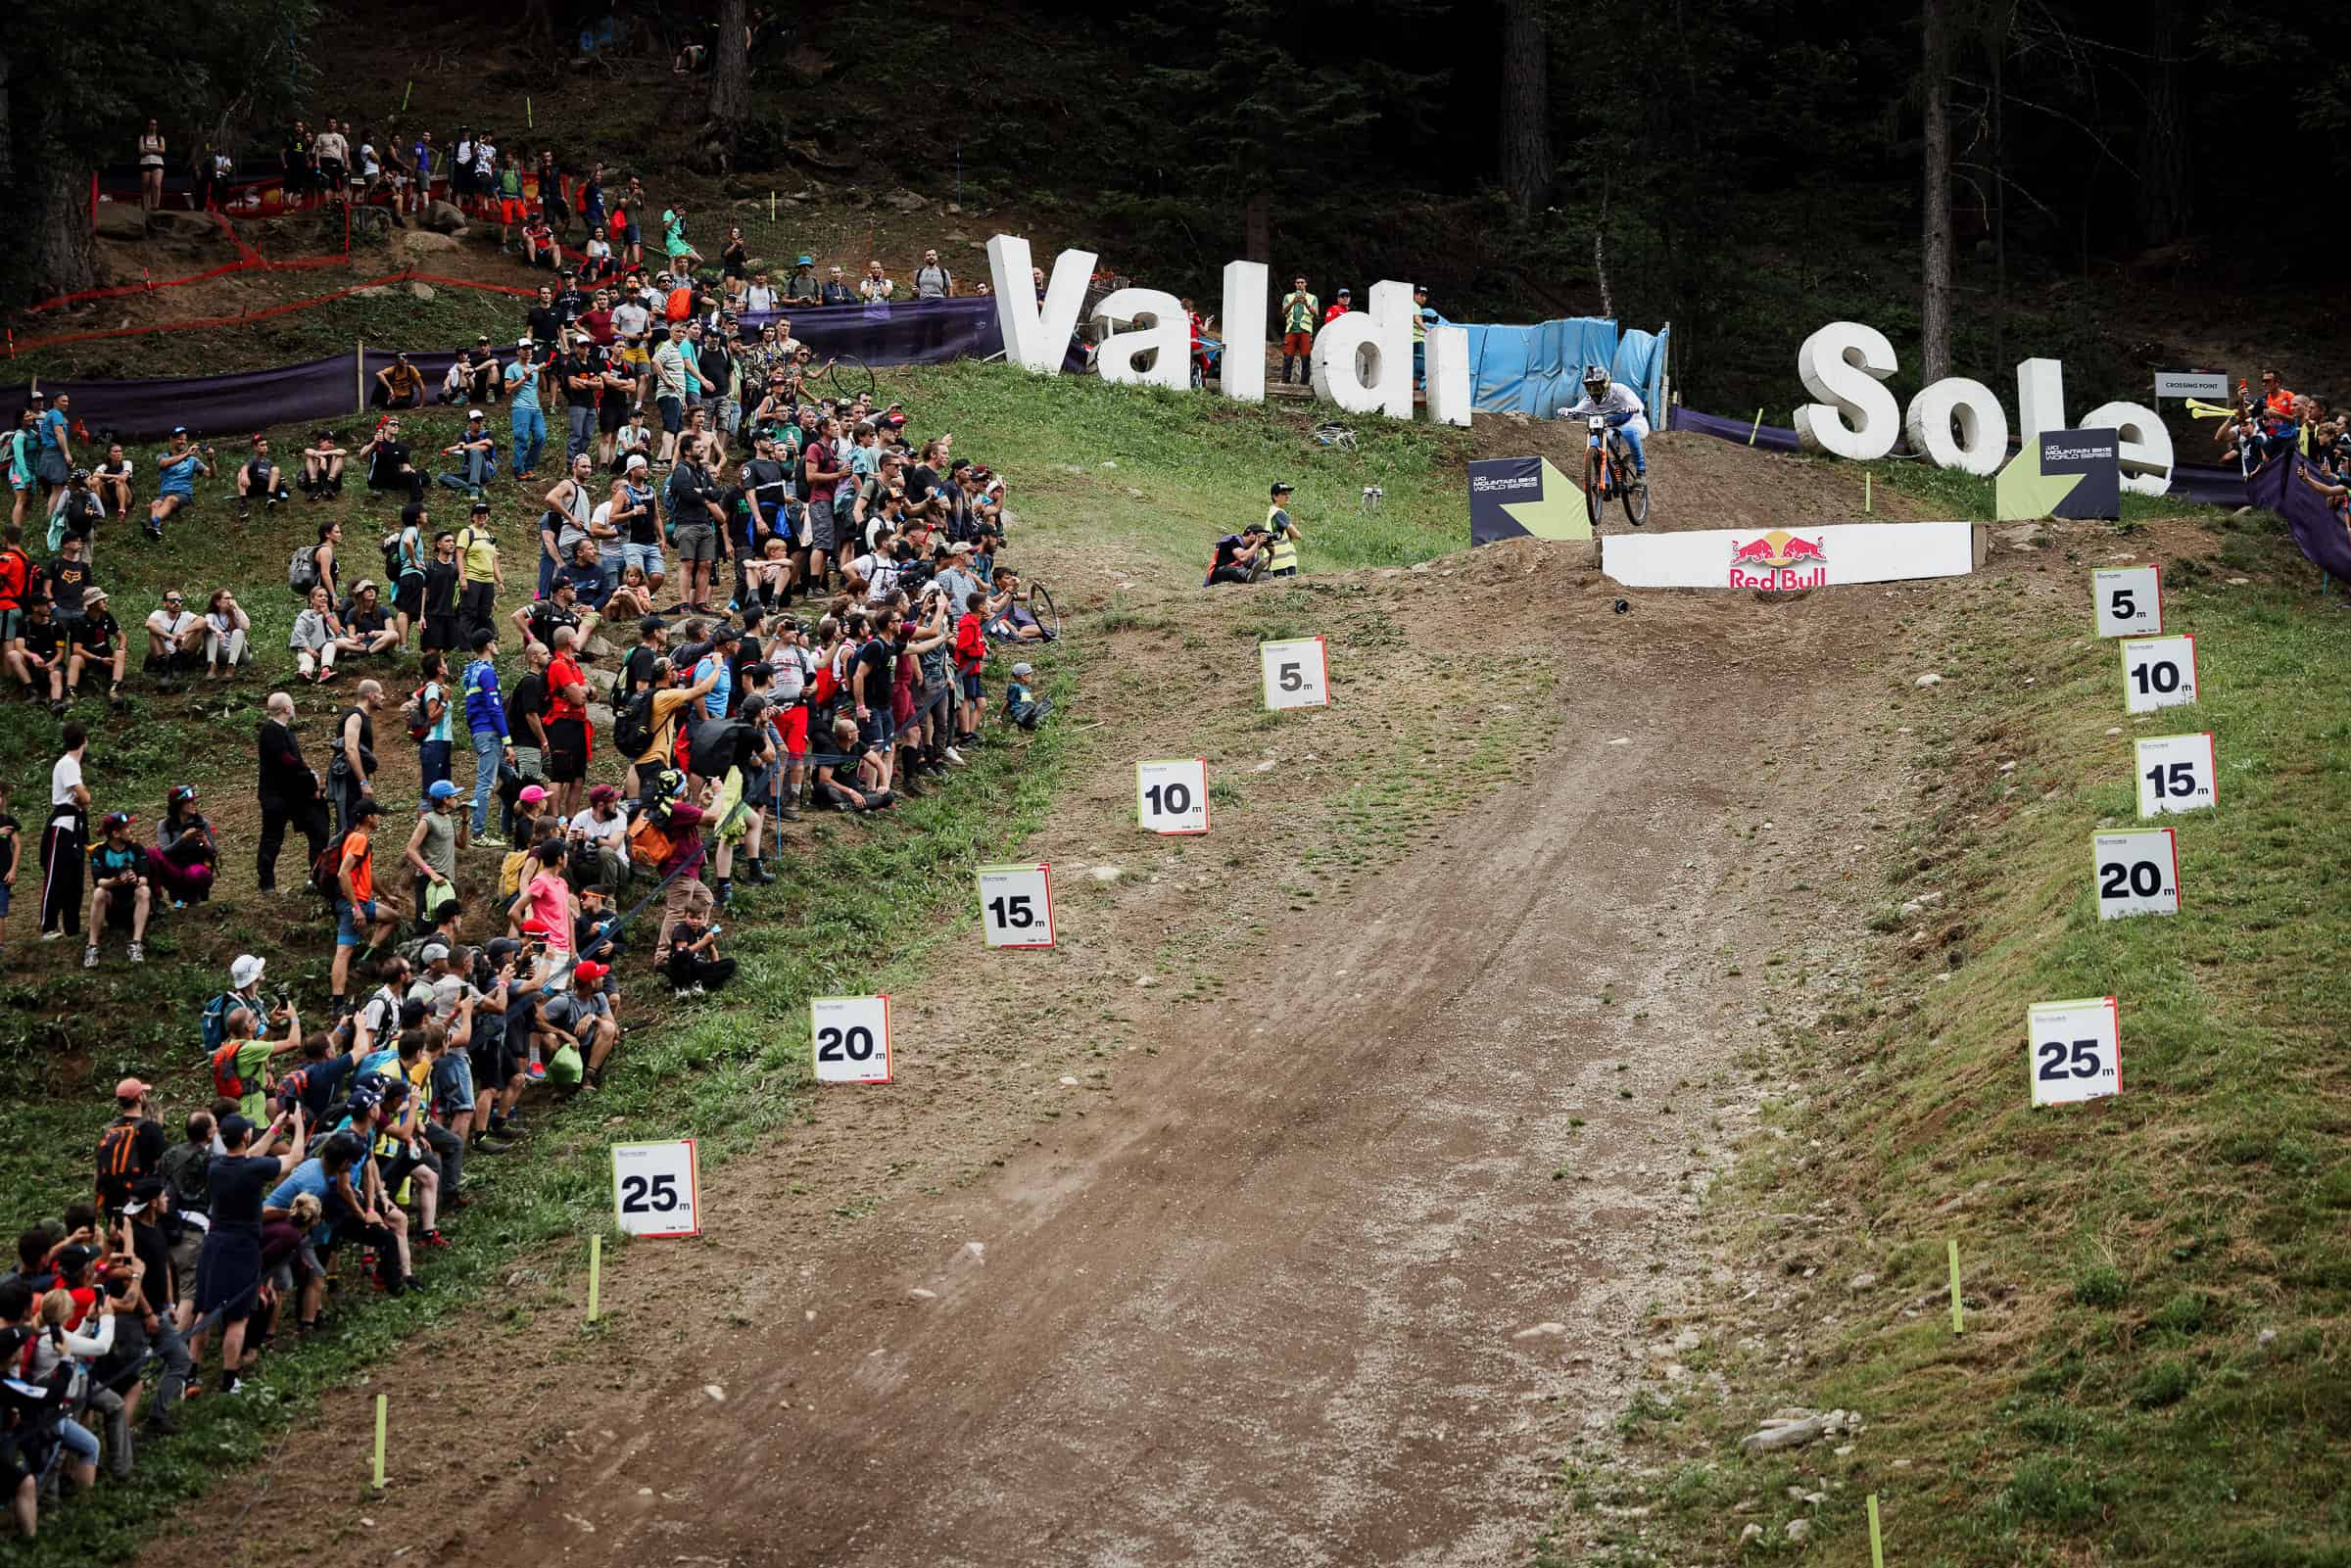 What we learnt: Val di Sole Trentino